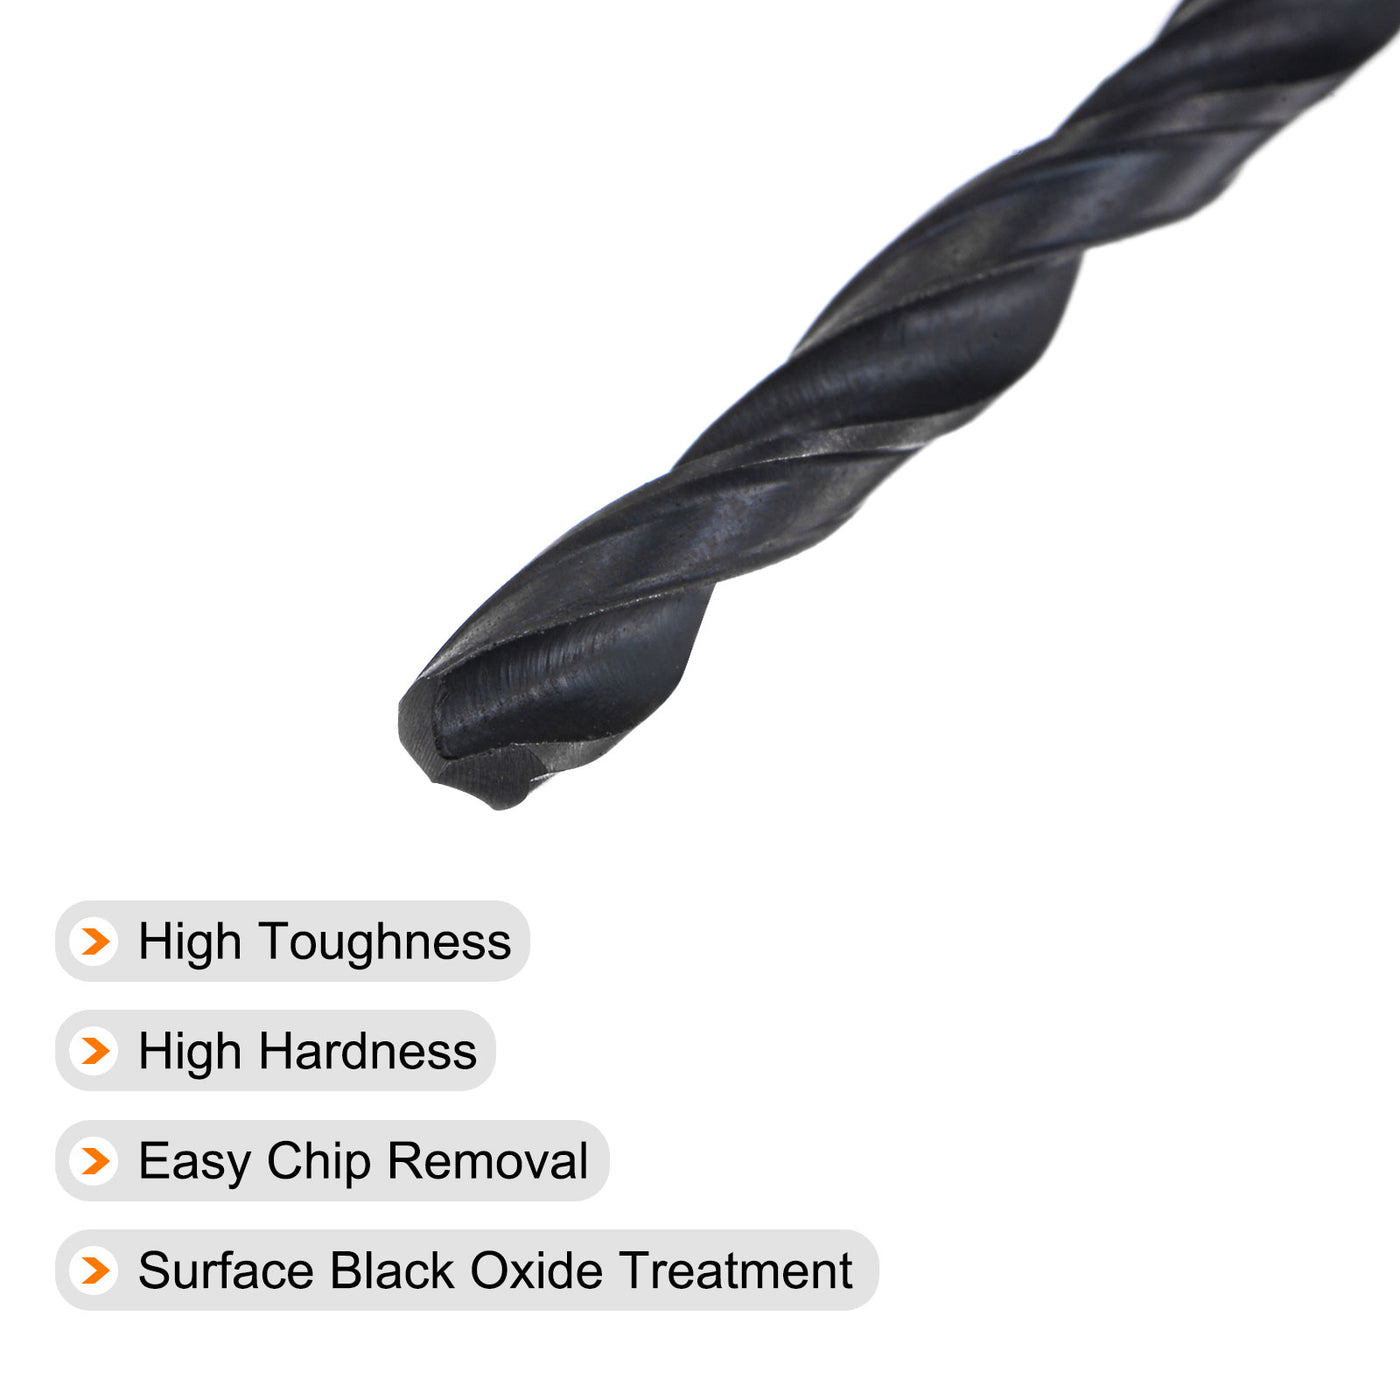 uxcell Uxcell High Speed Steel Twist Drill Bit, 4mm Fully Ground Black Oxide 75mm Long 5Pcs